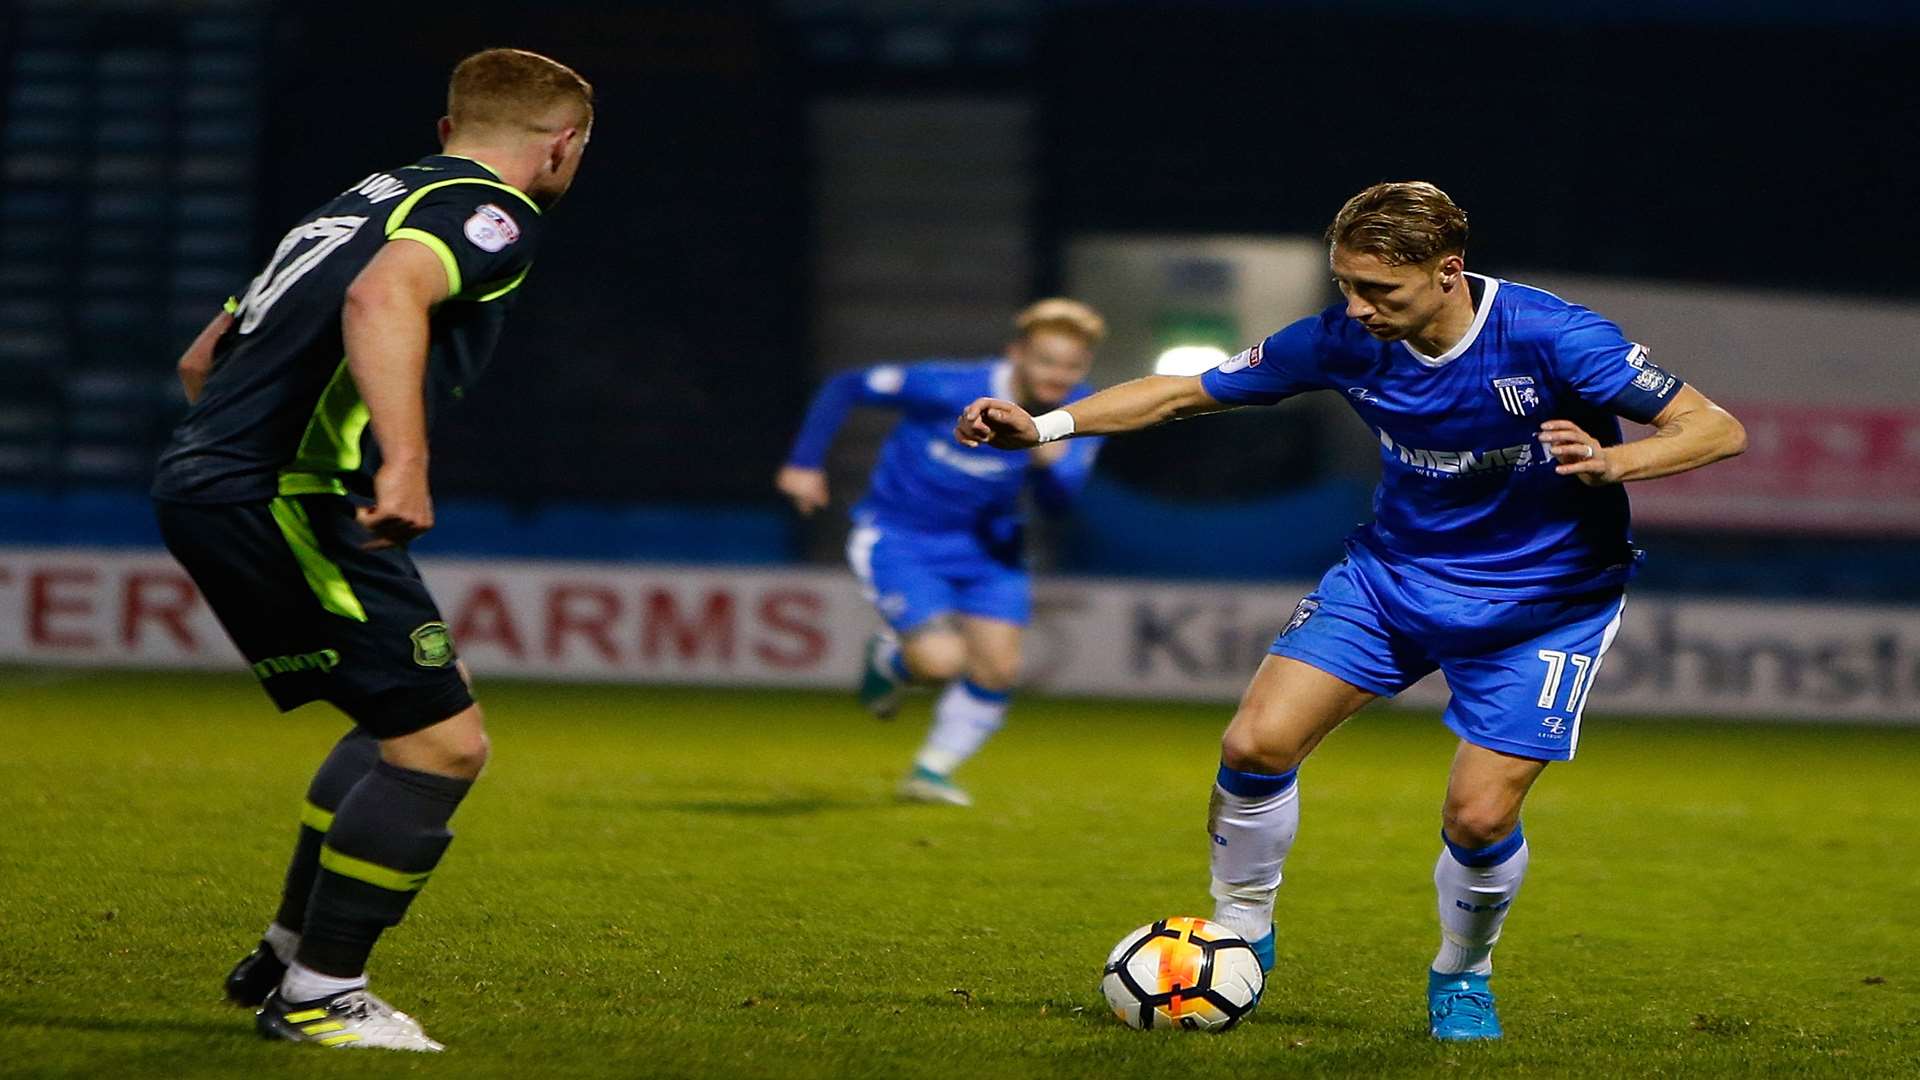 Gills midfielder Lee Martin on the ball against Carlisle. Picture: Andy Jones